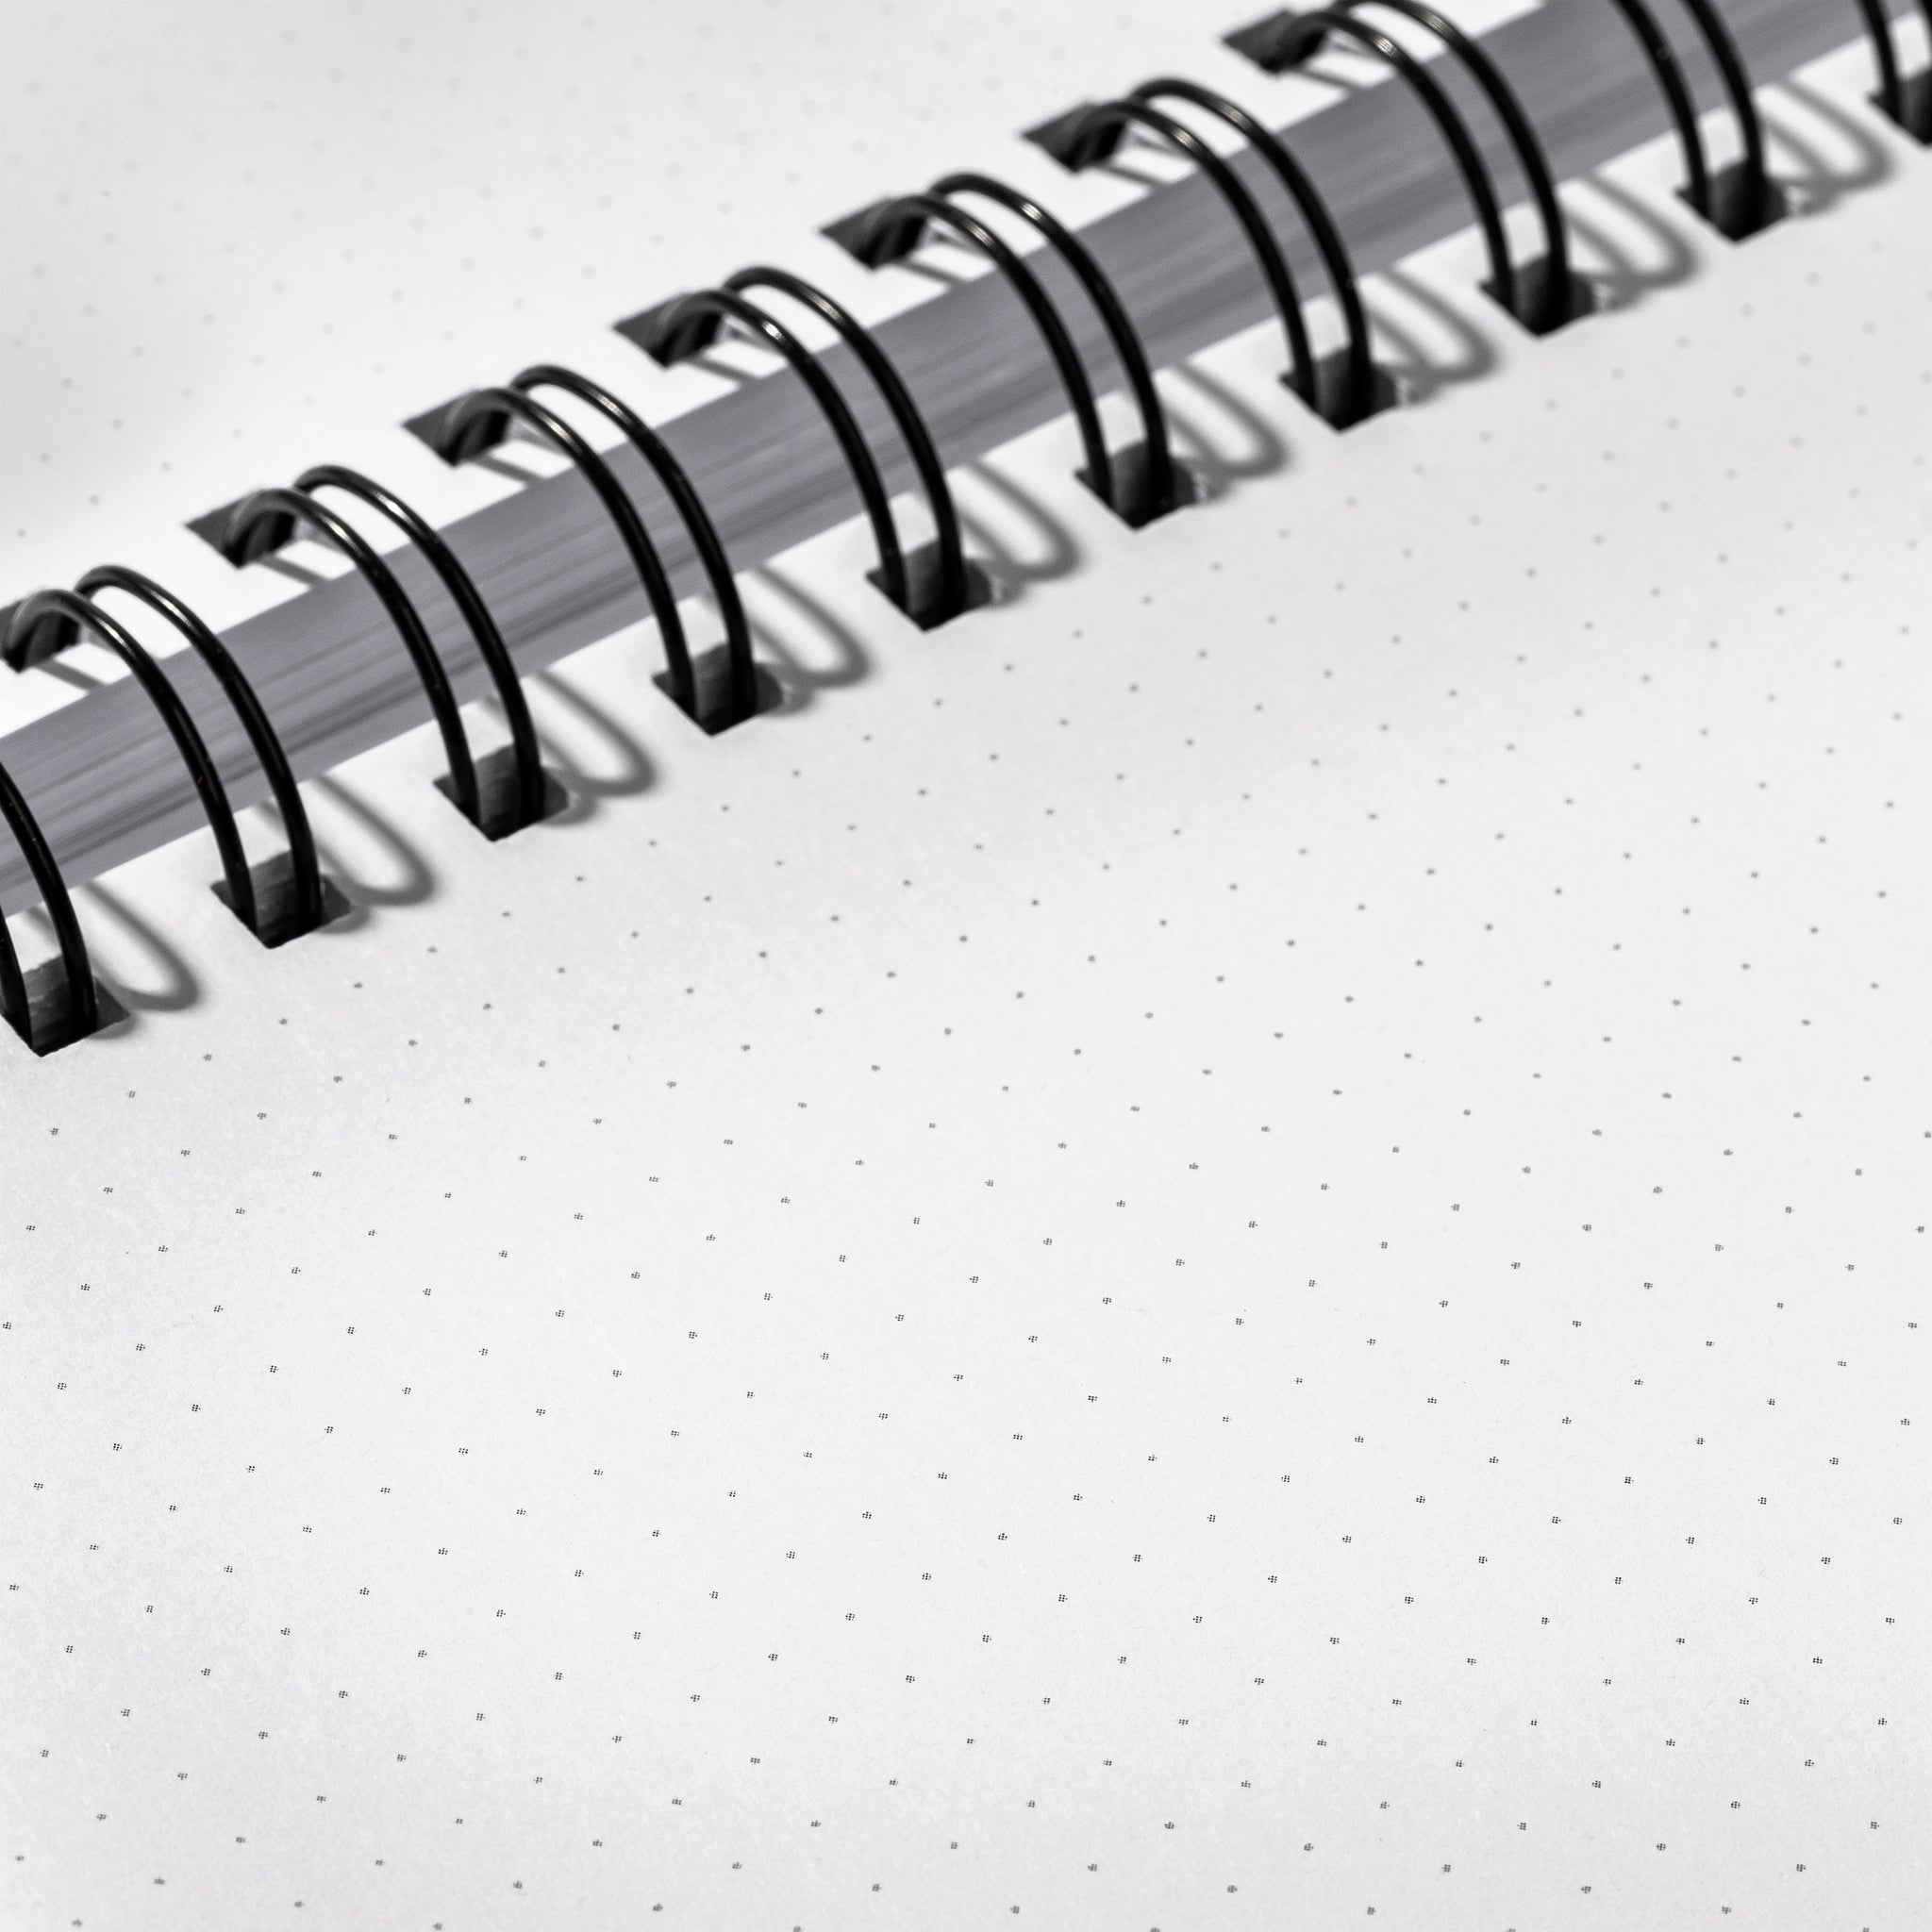 Spiral Notebook Paper without Line Stock Image - Image of background,  notepad: 16187091